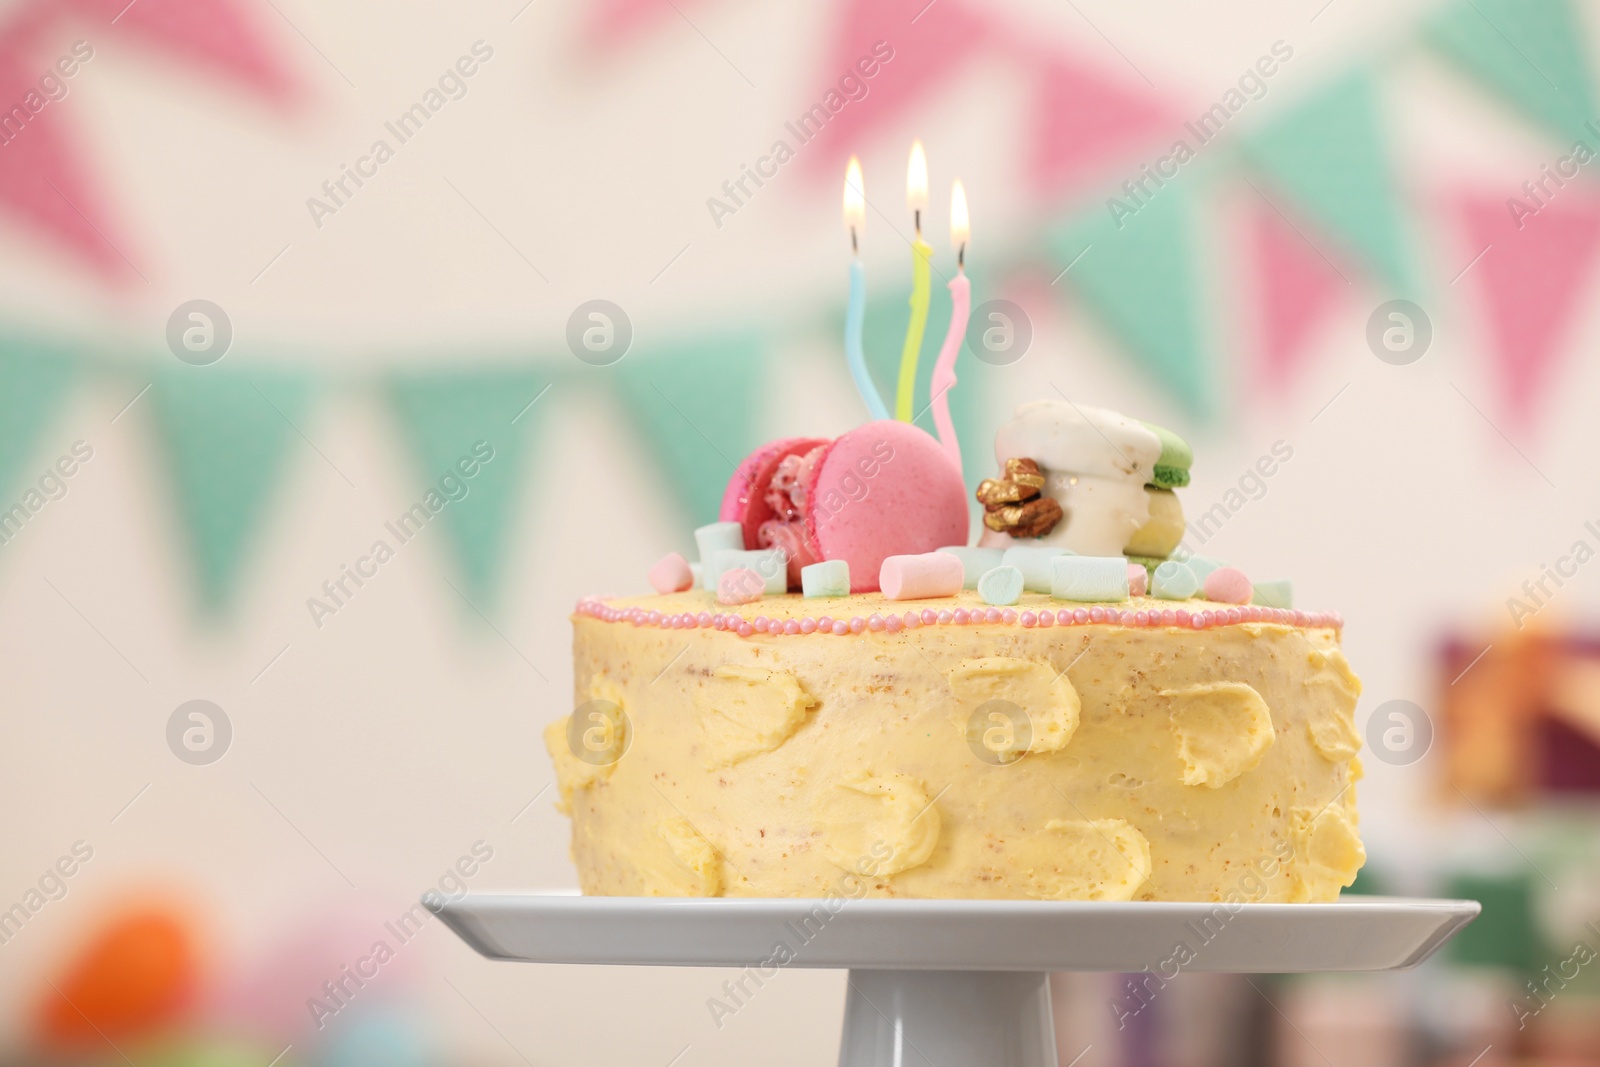 Photo of White stand with delicious cake decorated with macarons and marshmallows against blurred background, closeup